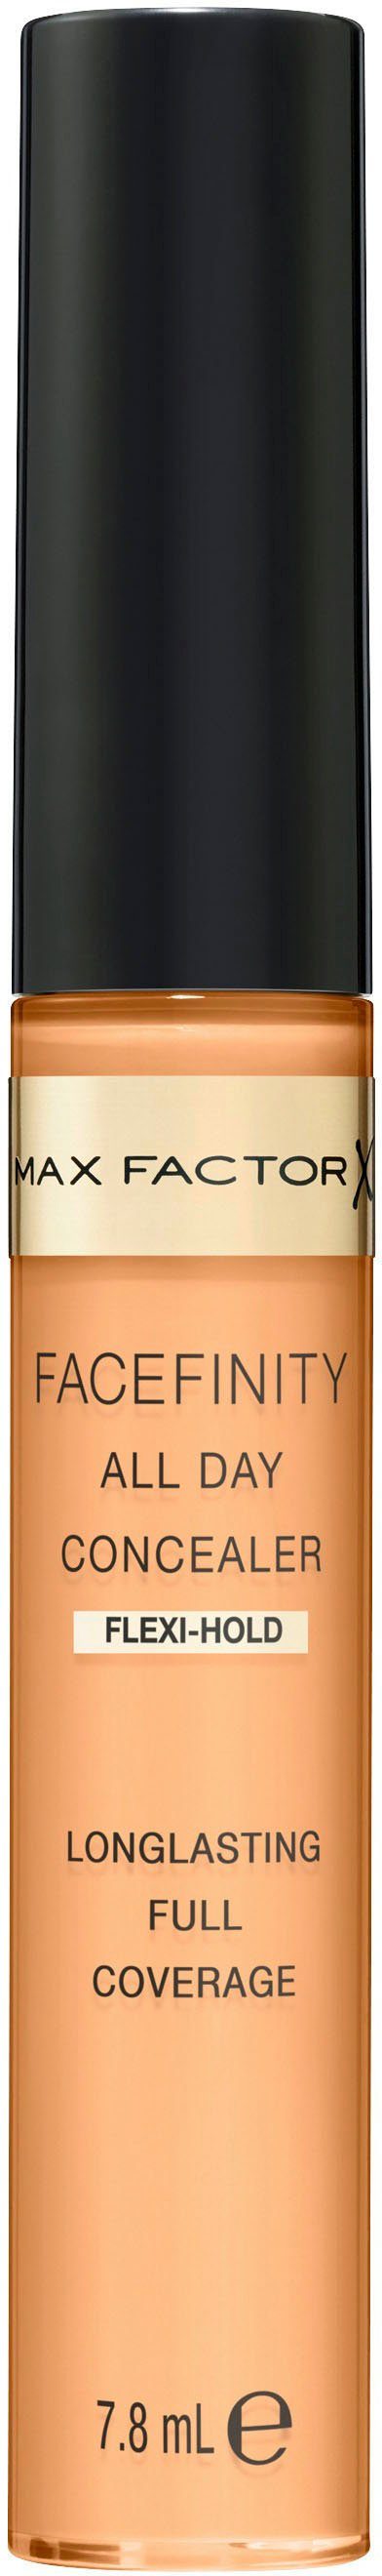 MAX FACTOR Concealer FACEFINITY Flawless All Day 70